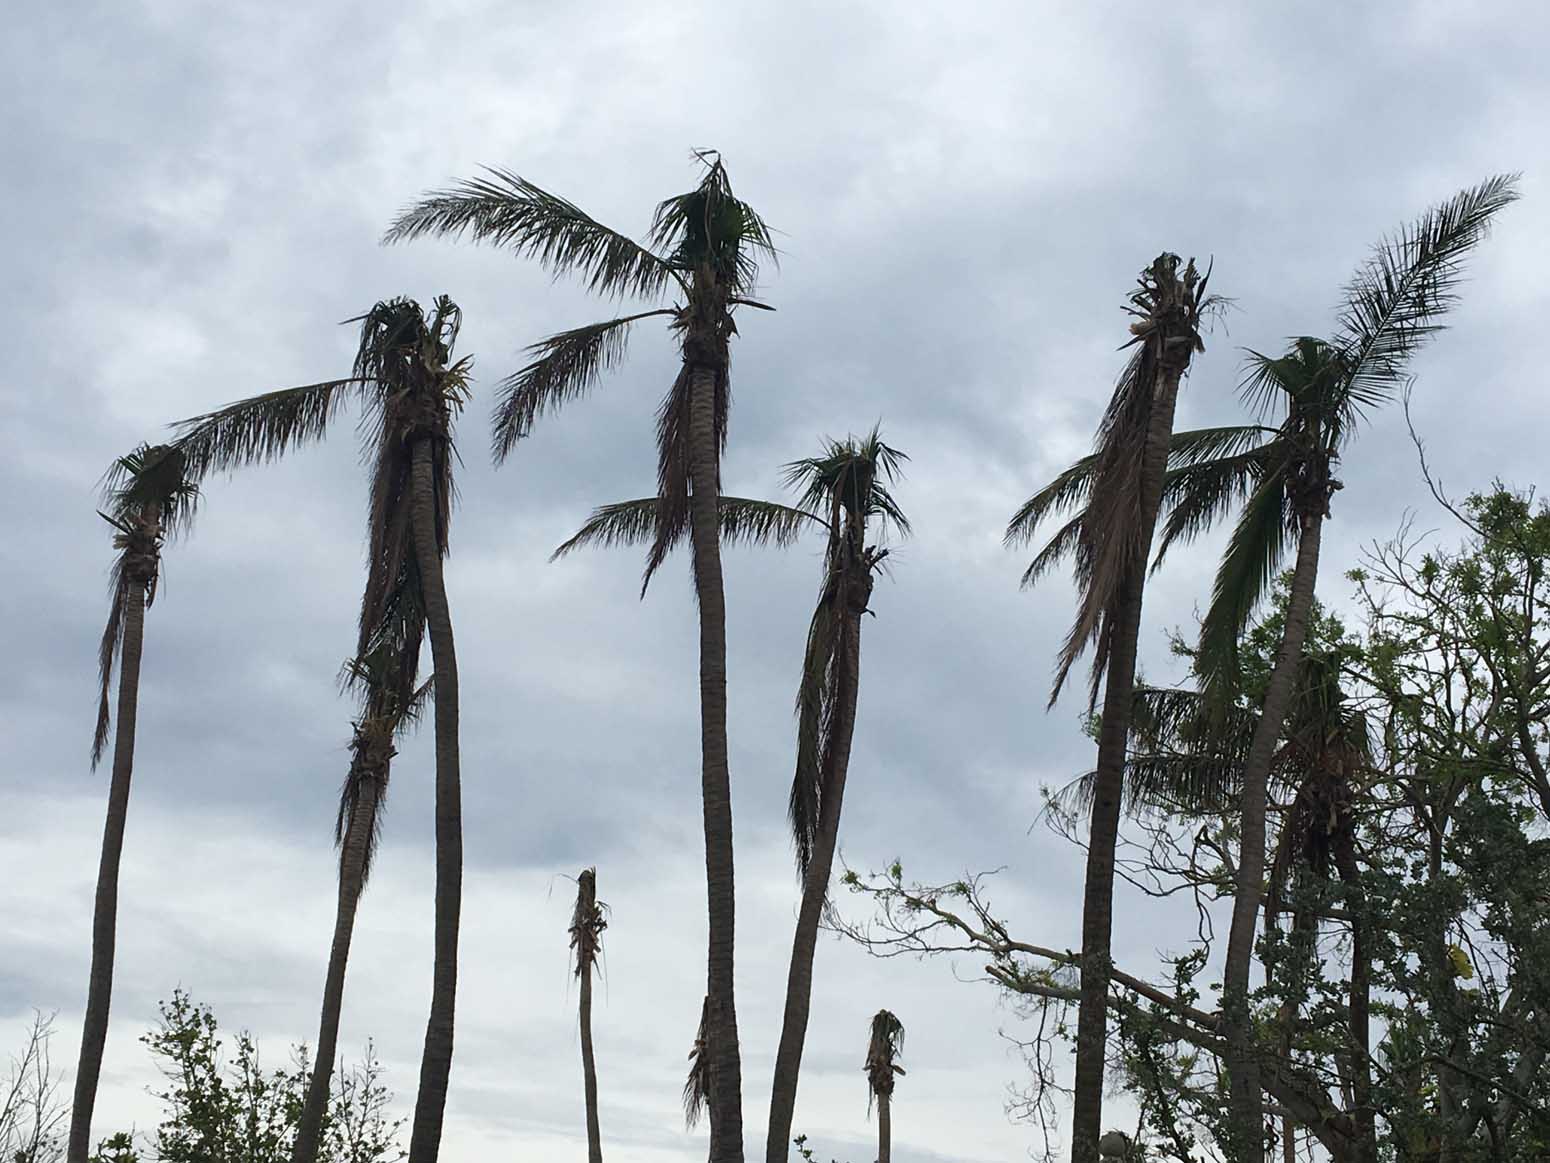 All the palm trees in Condado have been destroyed